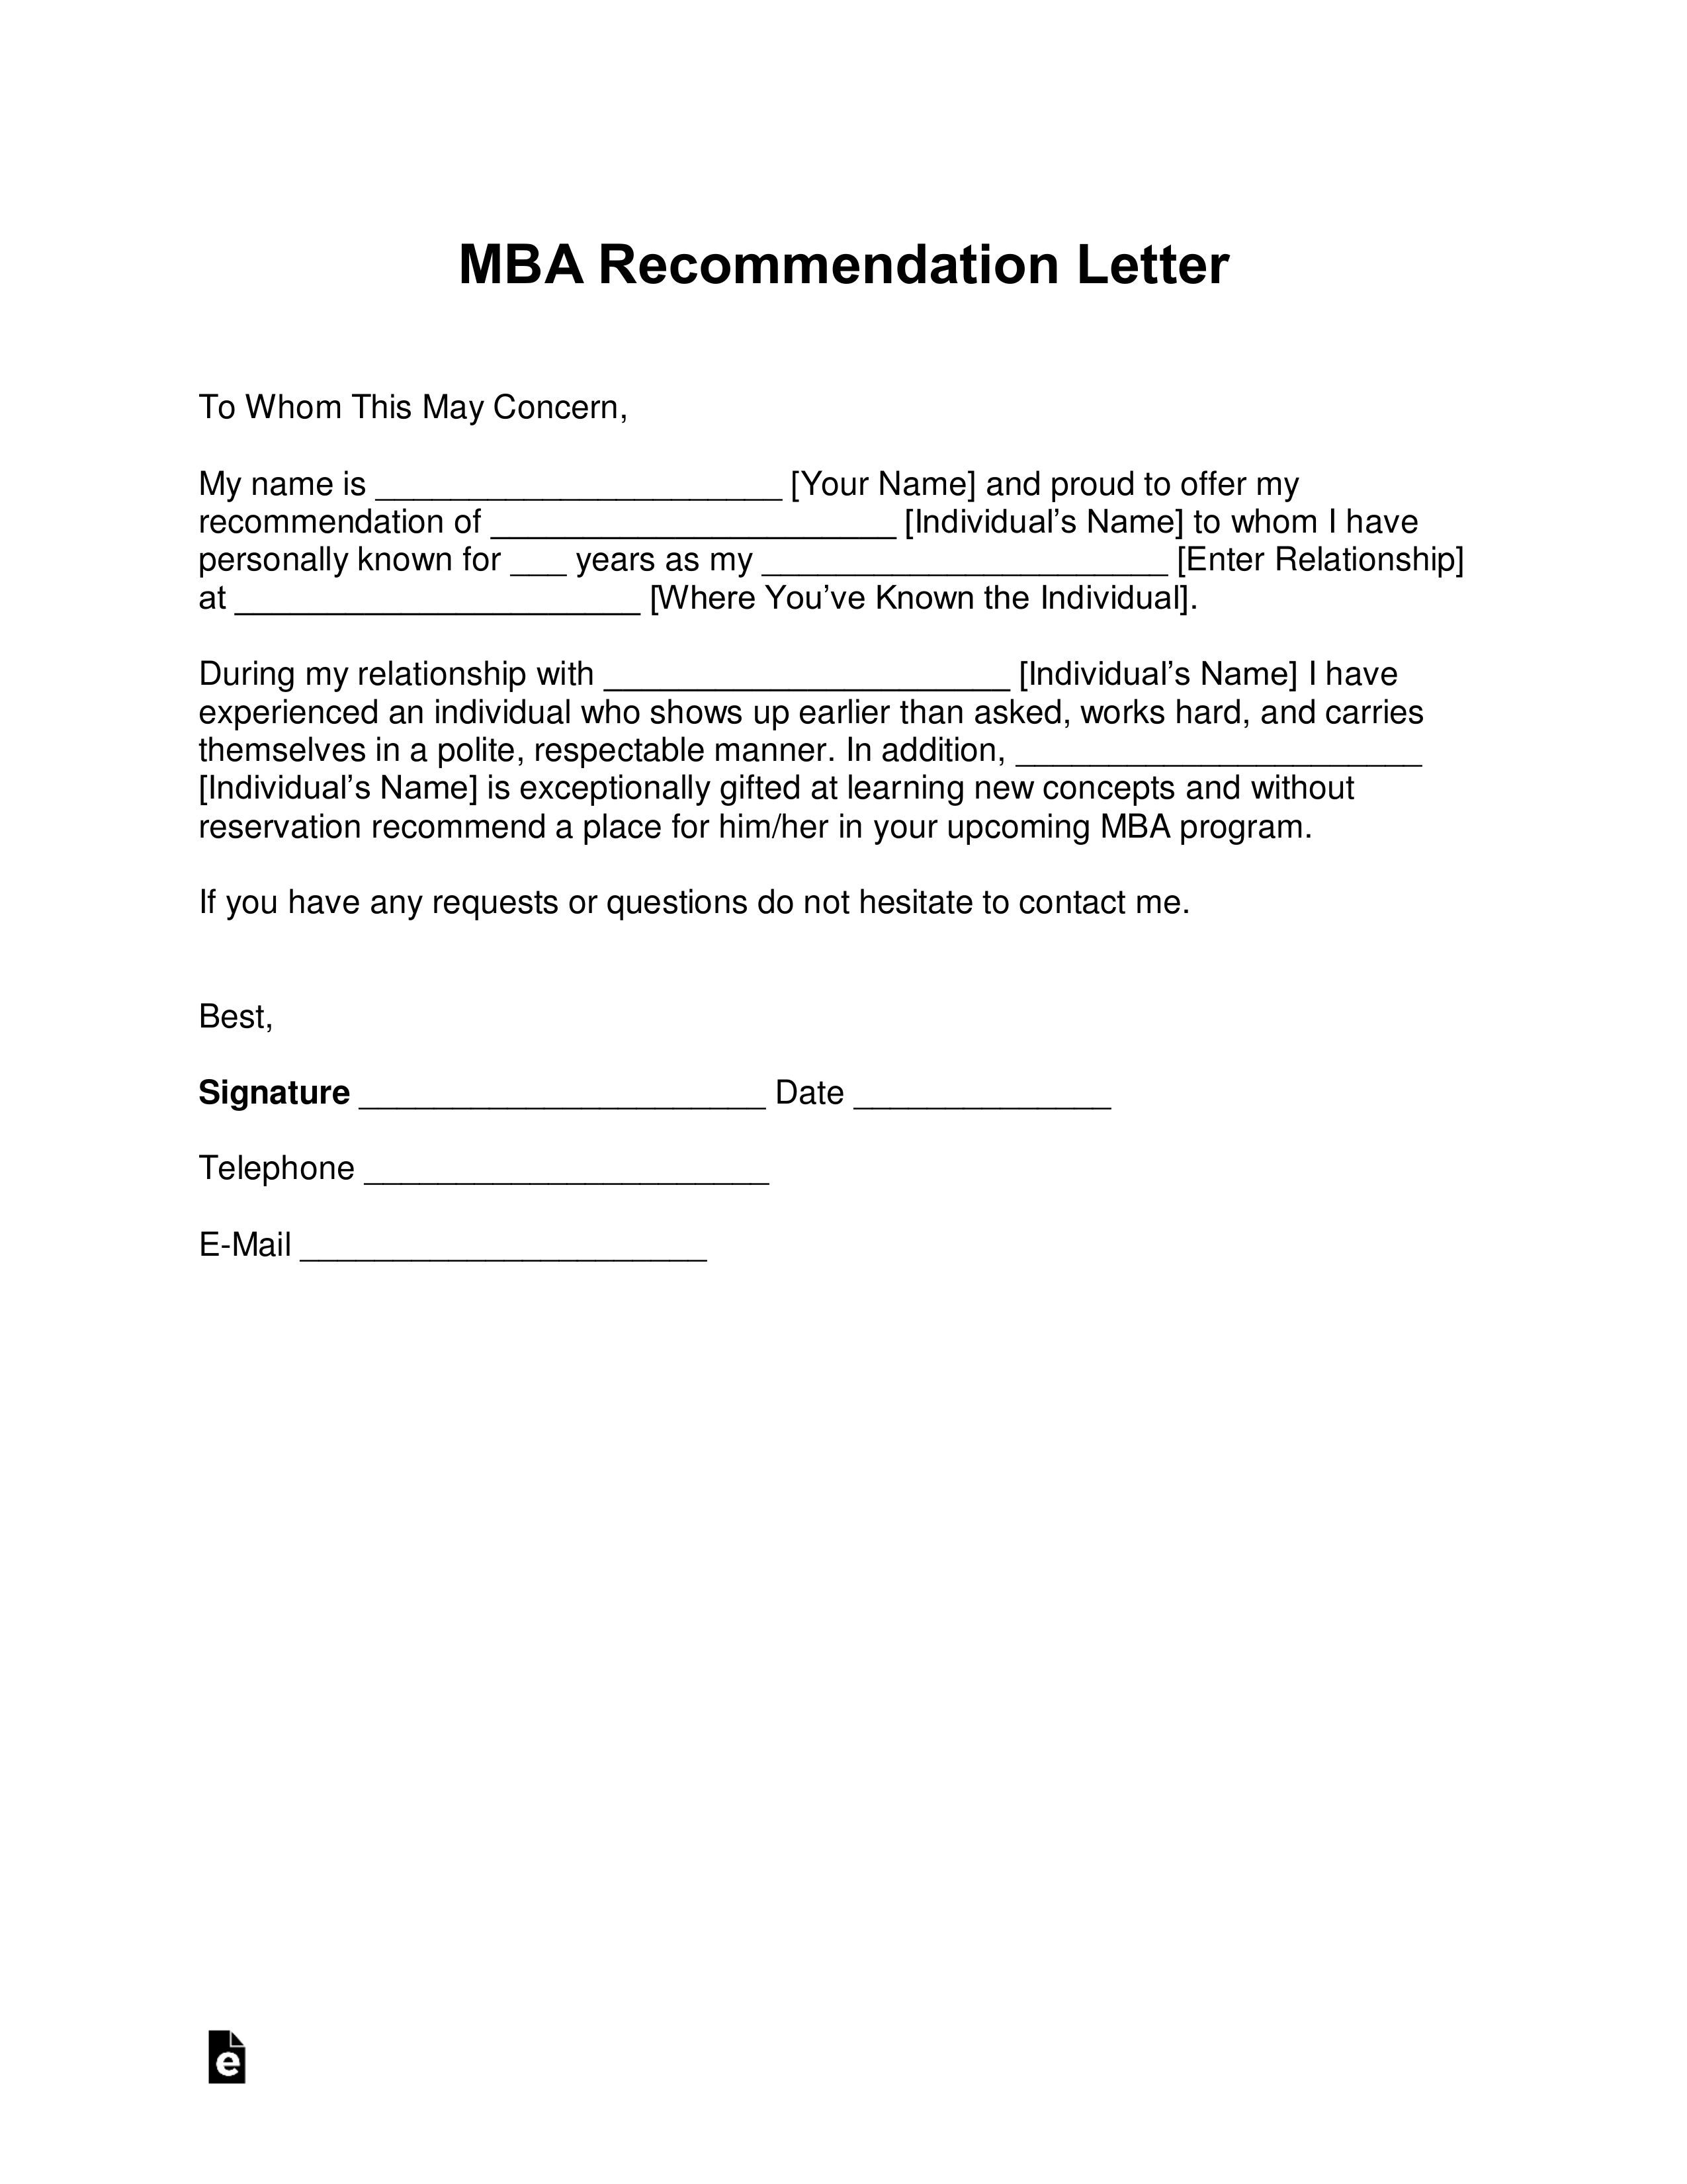 Recommendation Letter For Manager Position from eforms.com